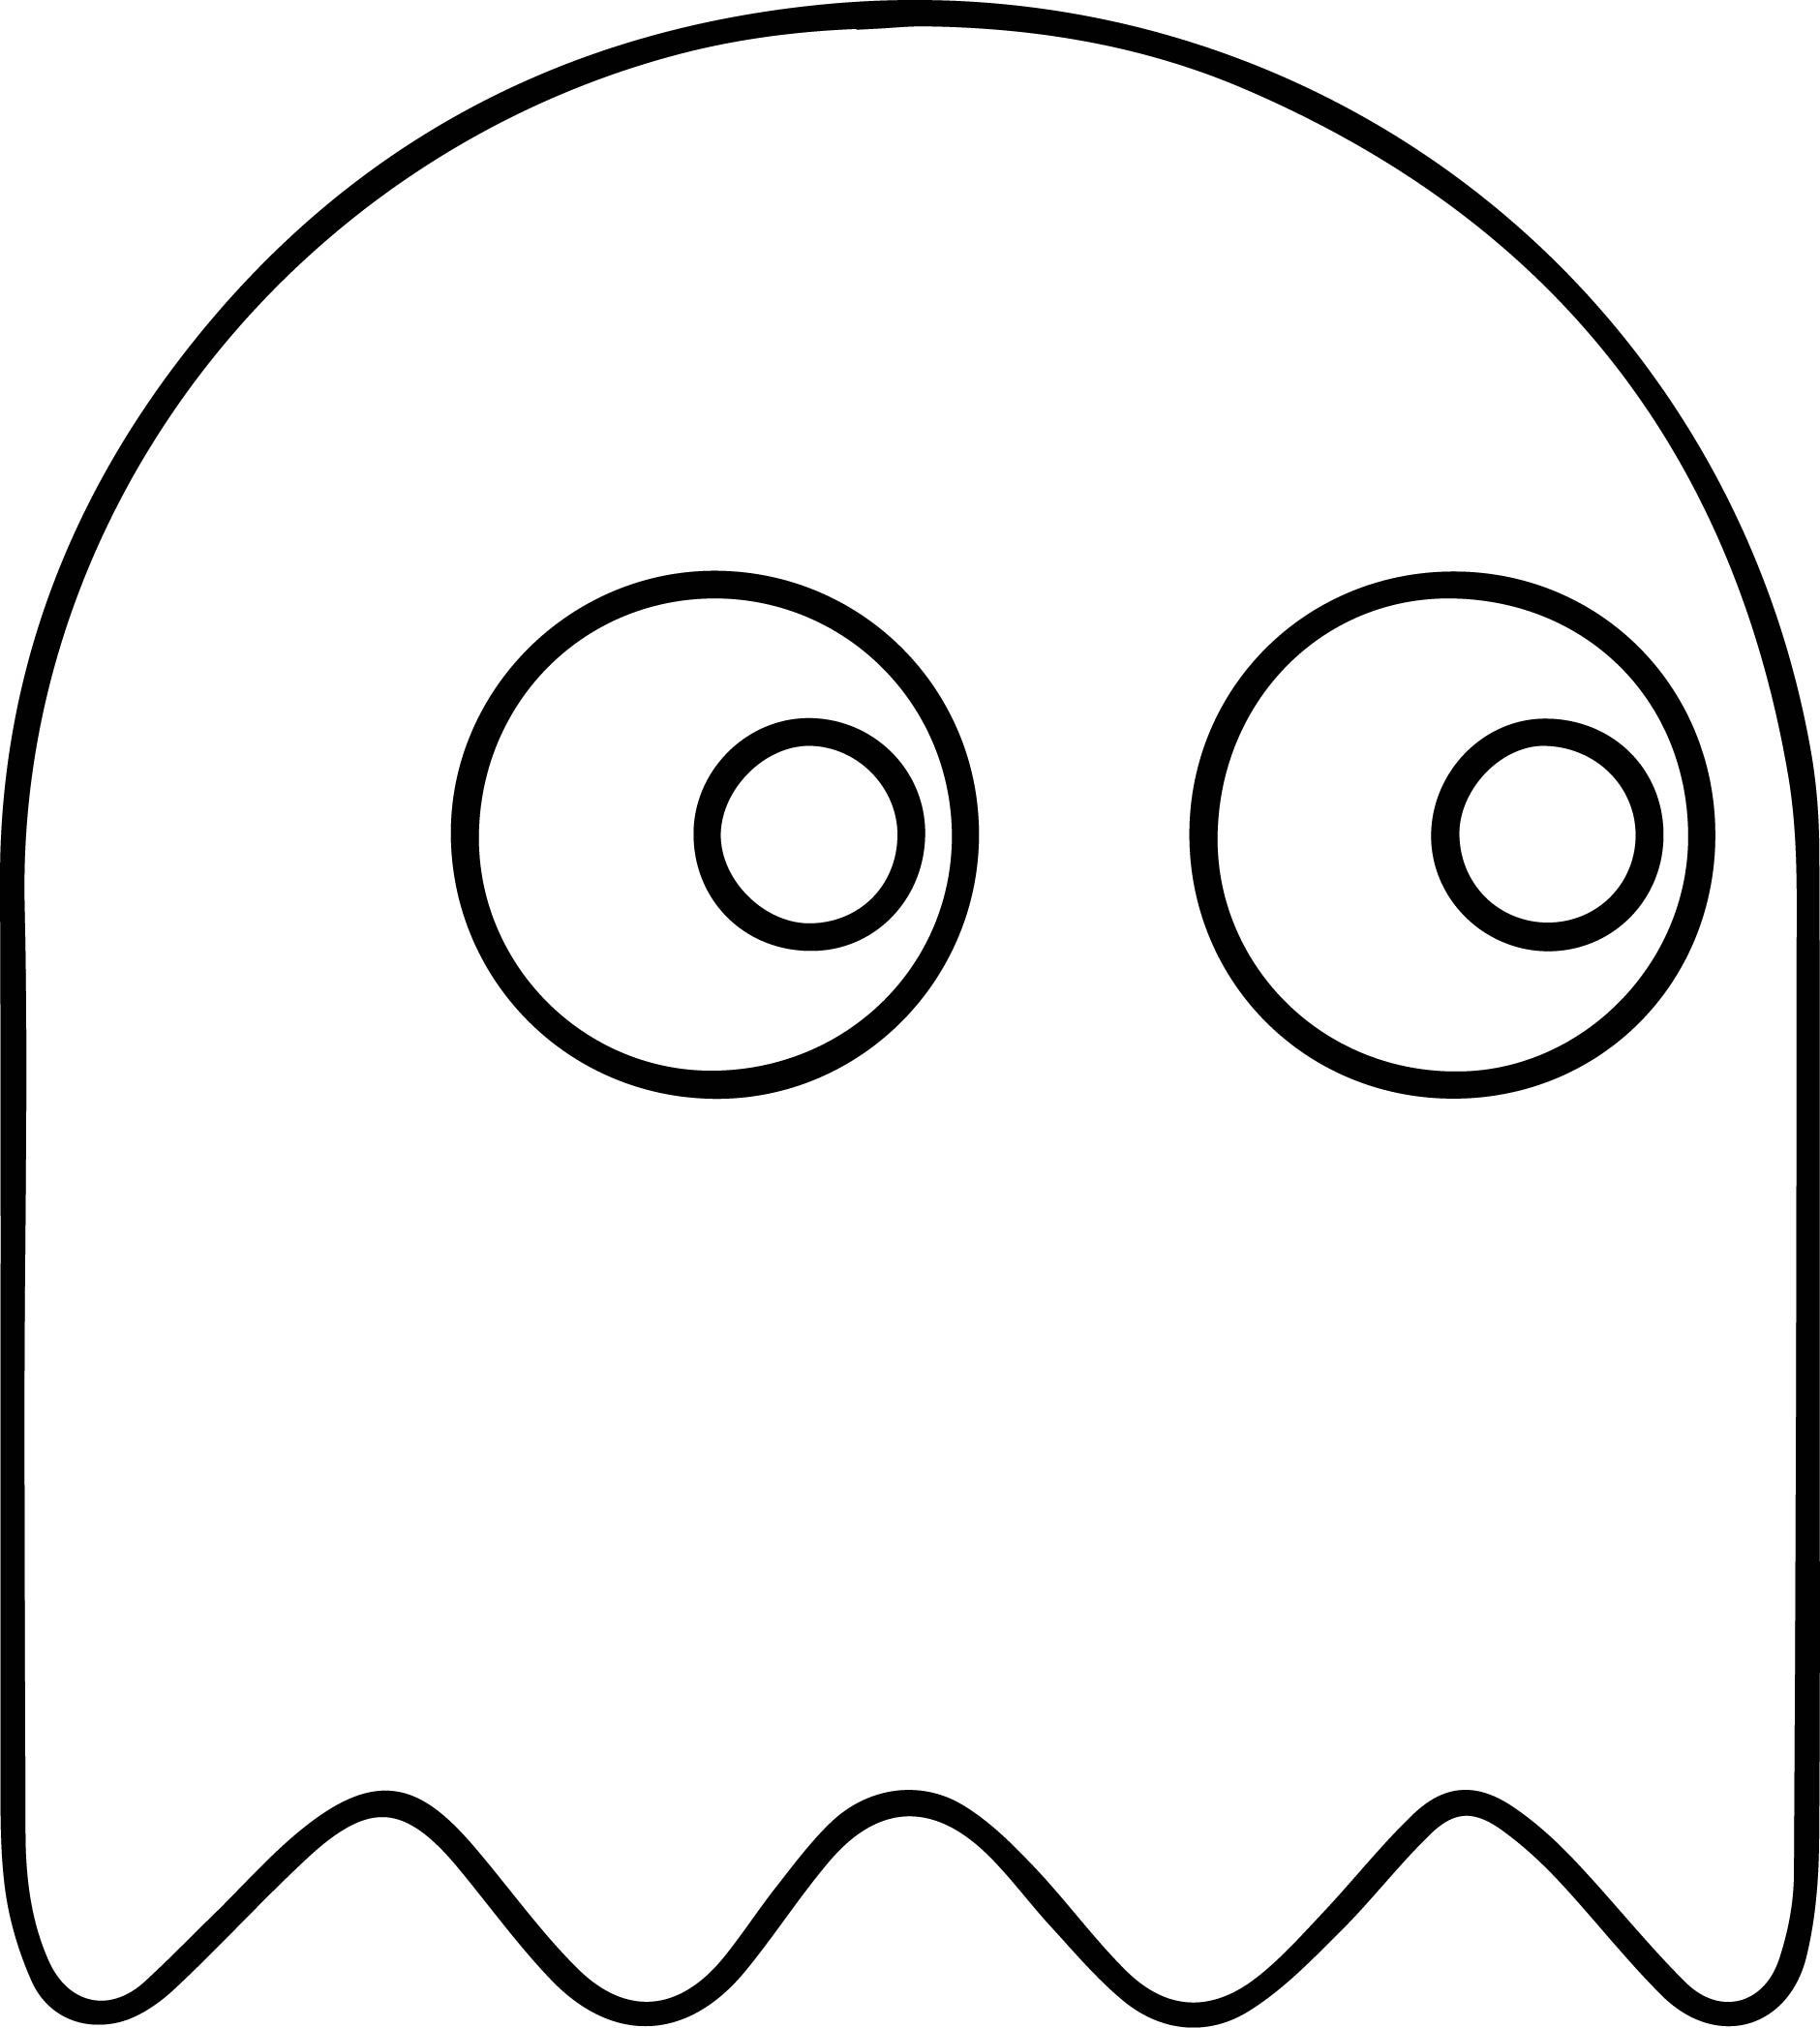 Collection of Pacman ghost clipart Free download best Pacman ghost